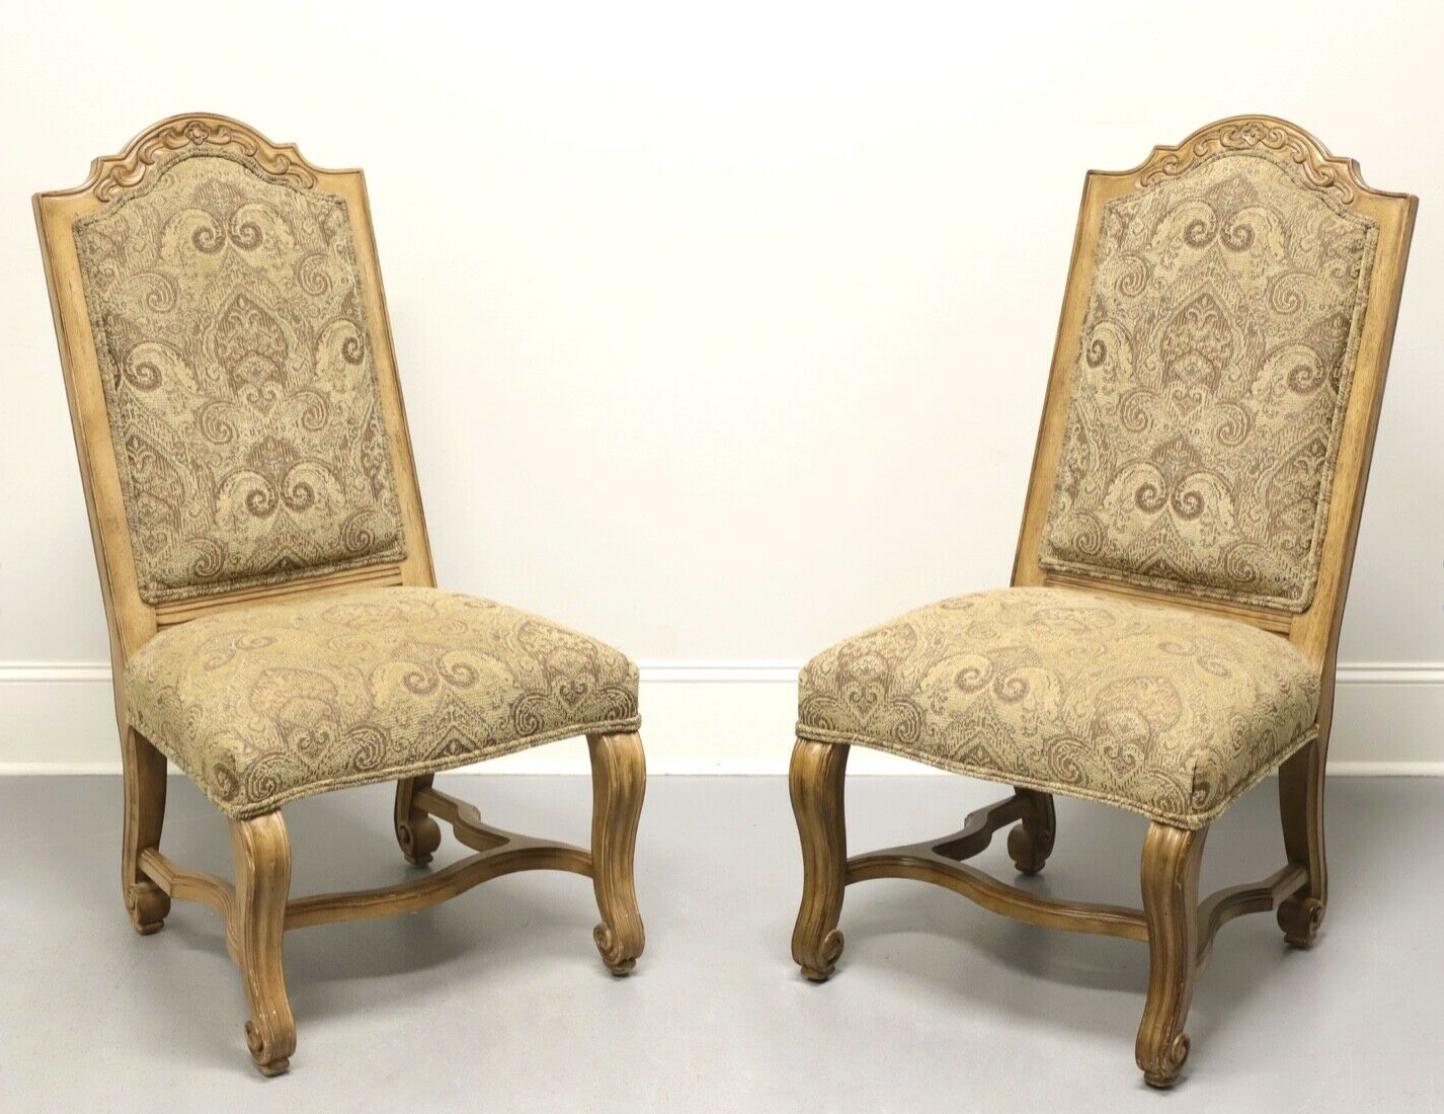 BERNHARDT Rustic Italian Style Dining Side Chairs - Pair A 2